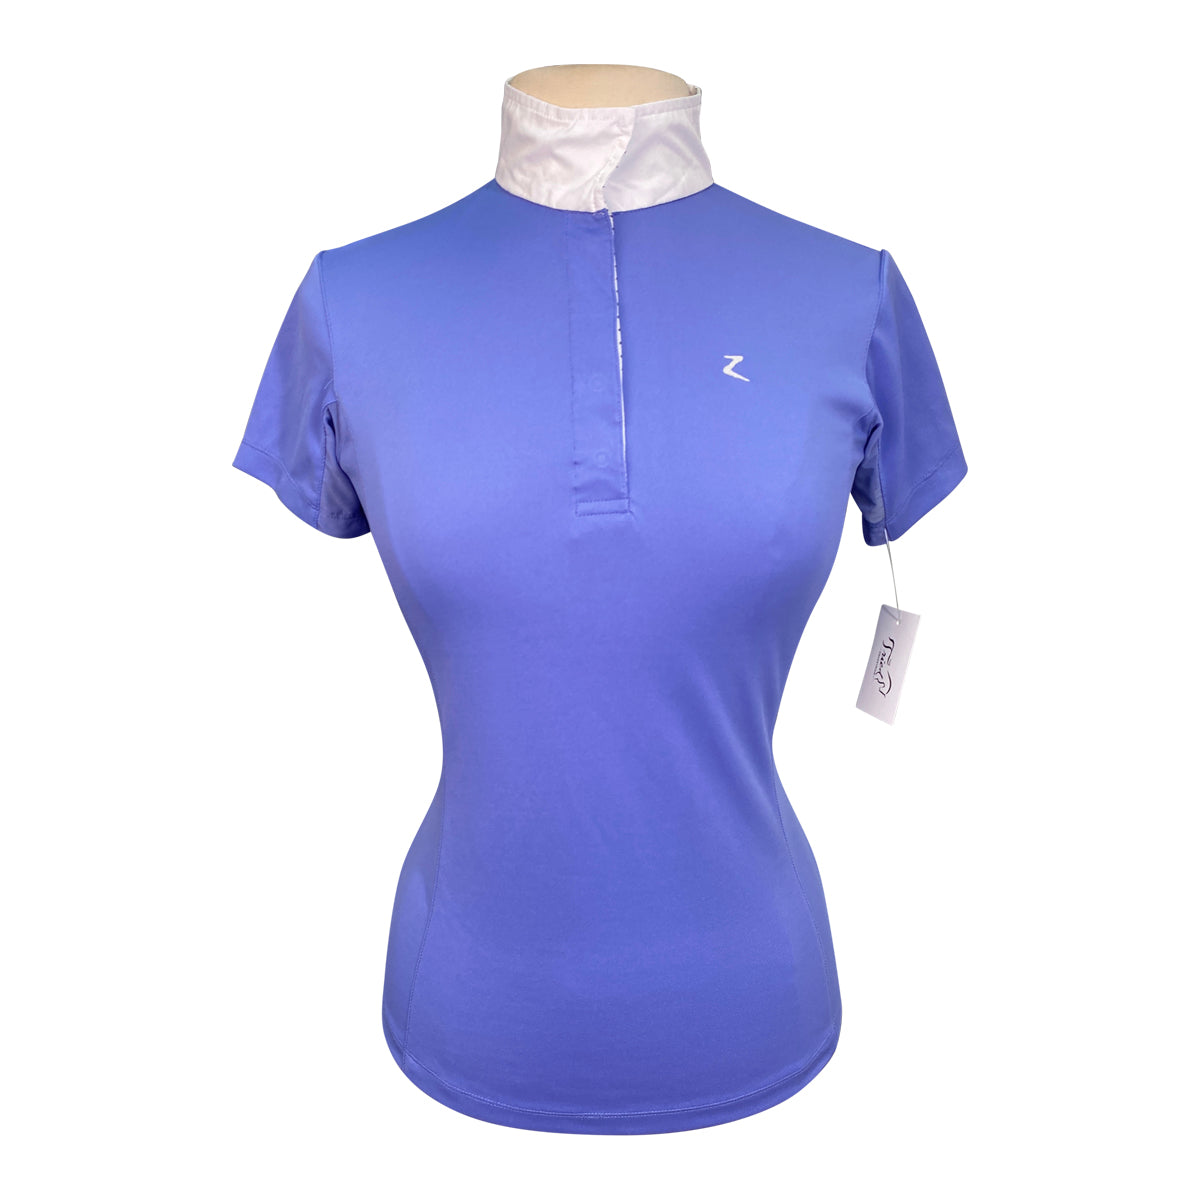 Horze 'Blaire' Short Sleeve Show Shirt in Periwinkle